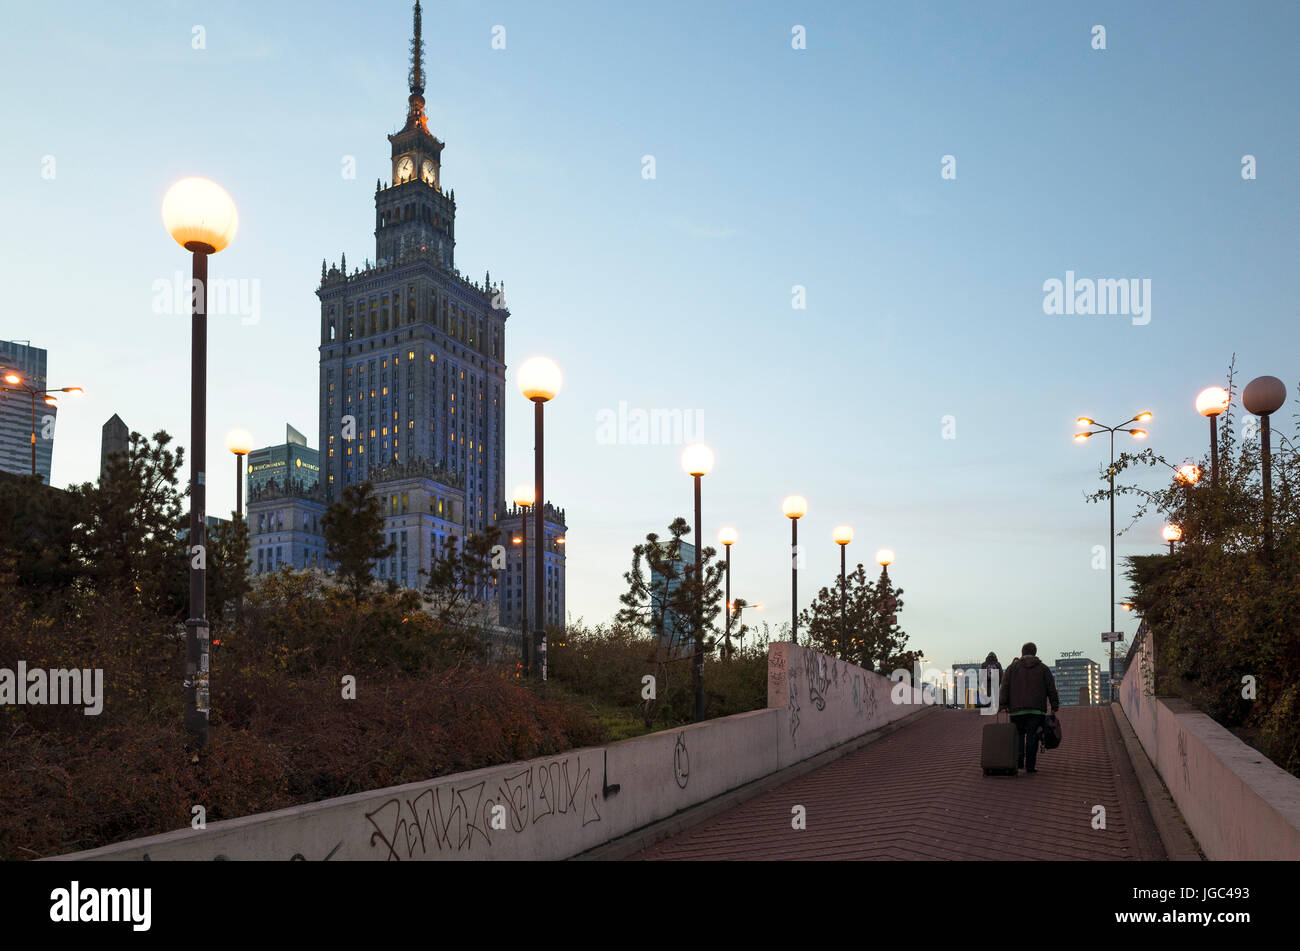 Palace of Culture and Science, Warsaw, Poland Stock Photo